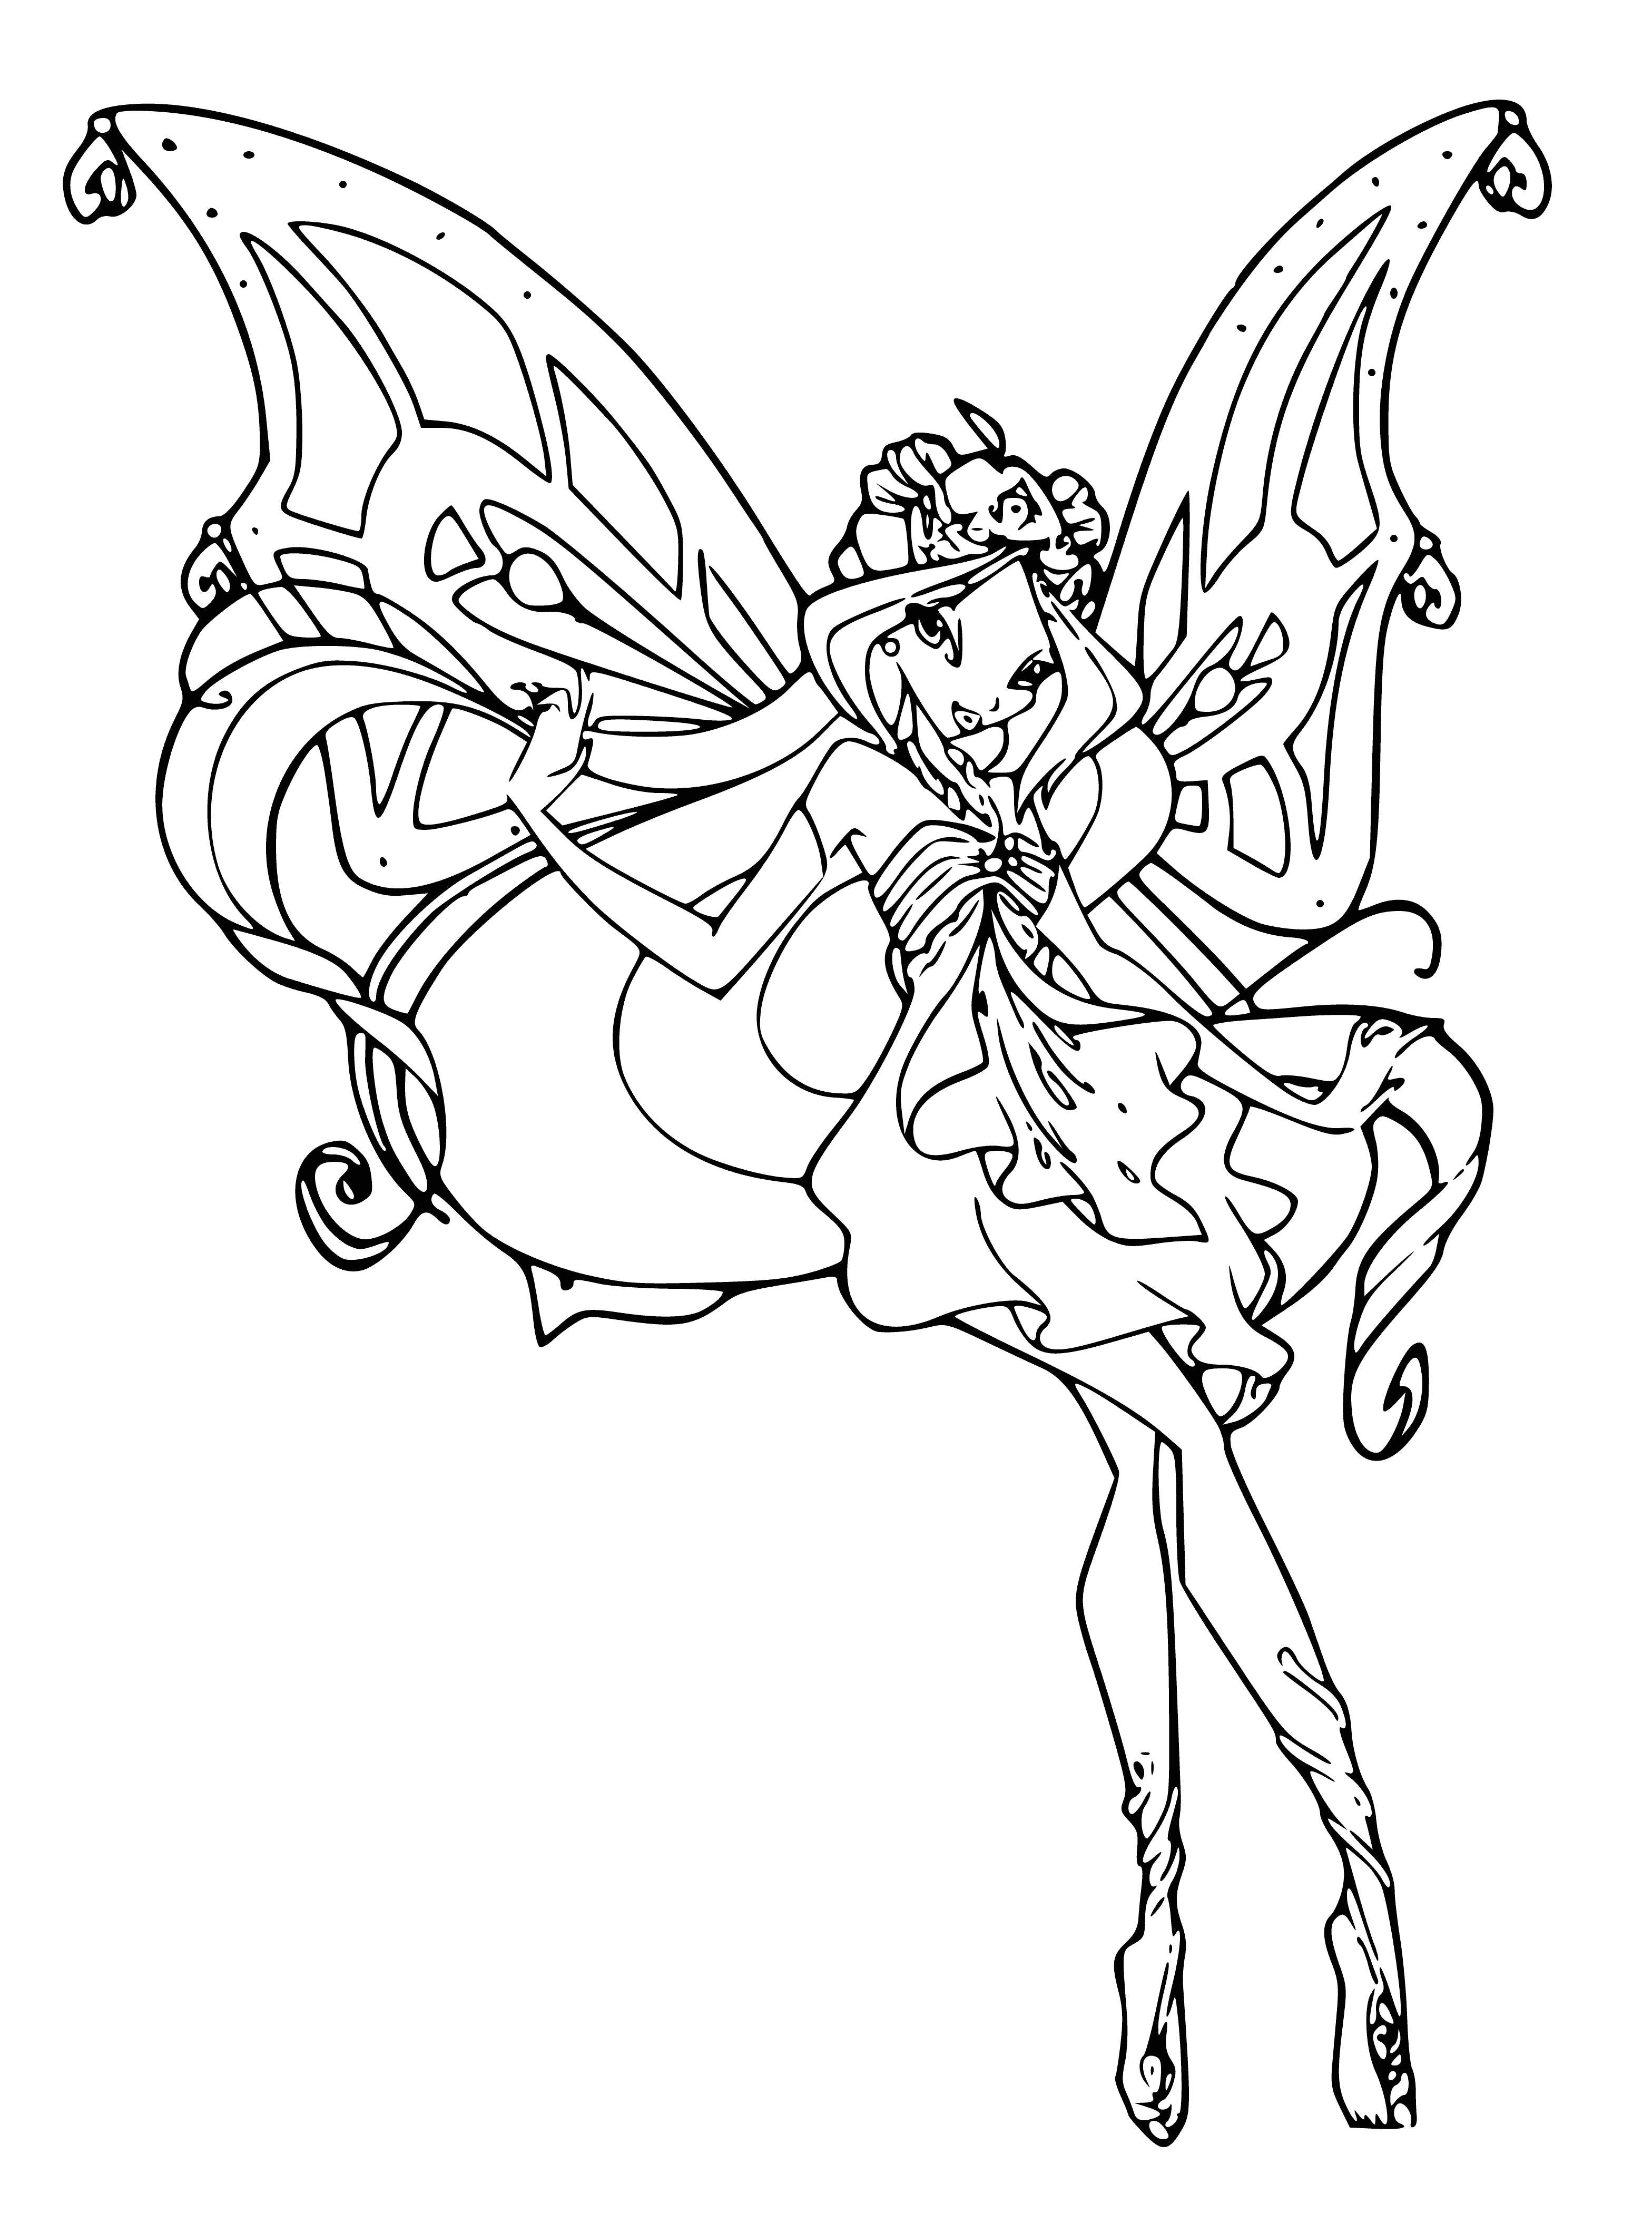 coloring page: The Flora has brown wings with white and gold designs, holding a white flower in its mouth. #MacroMonday